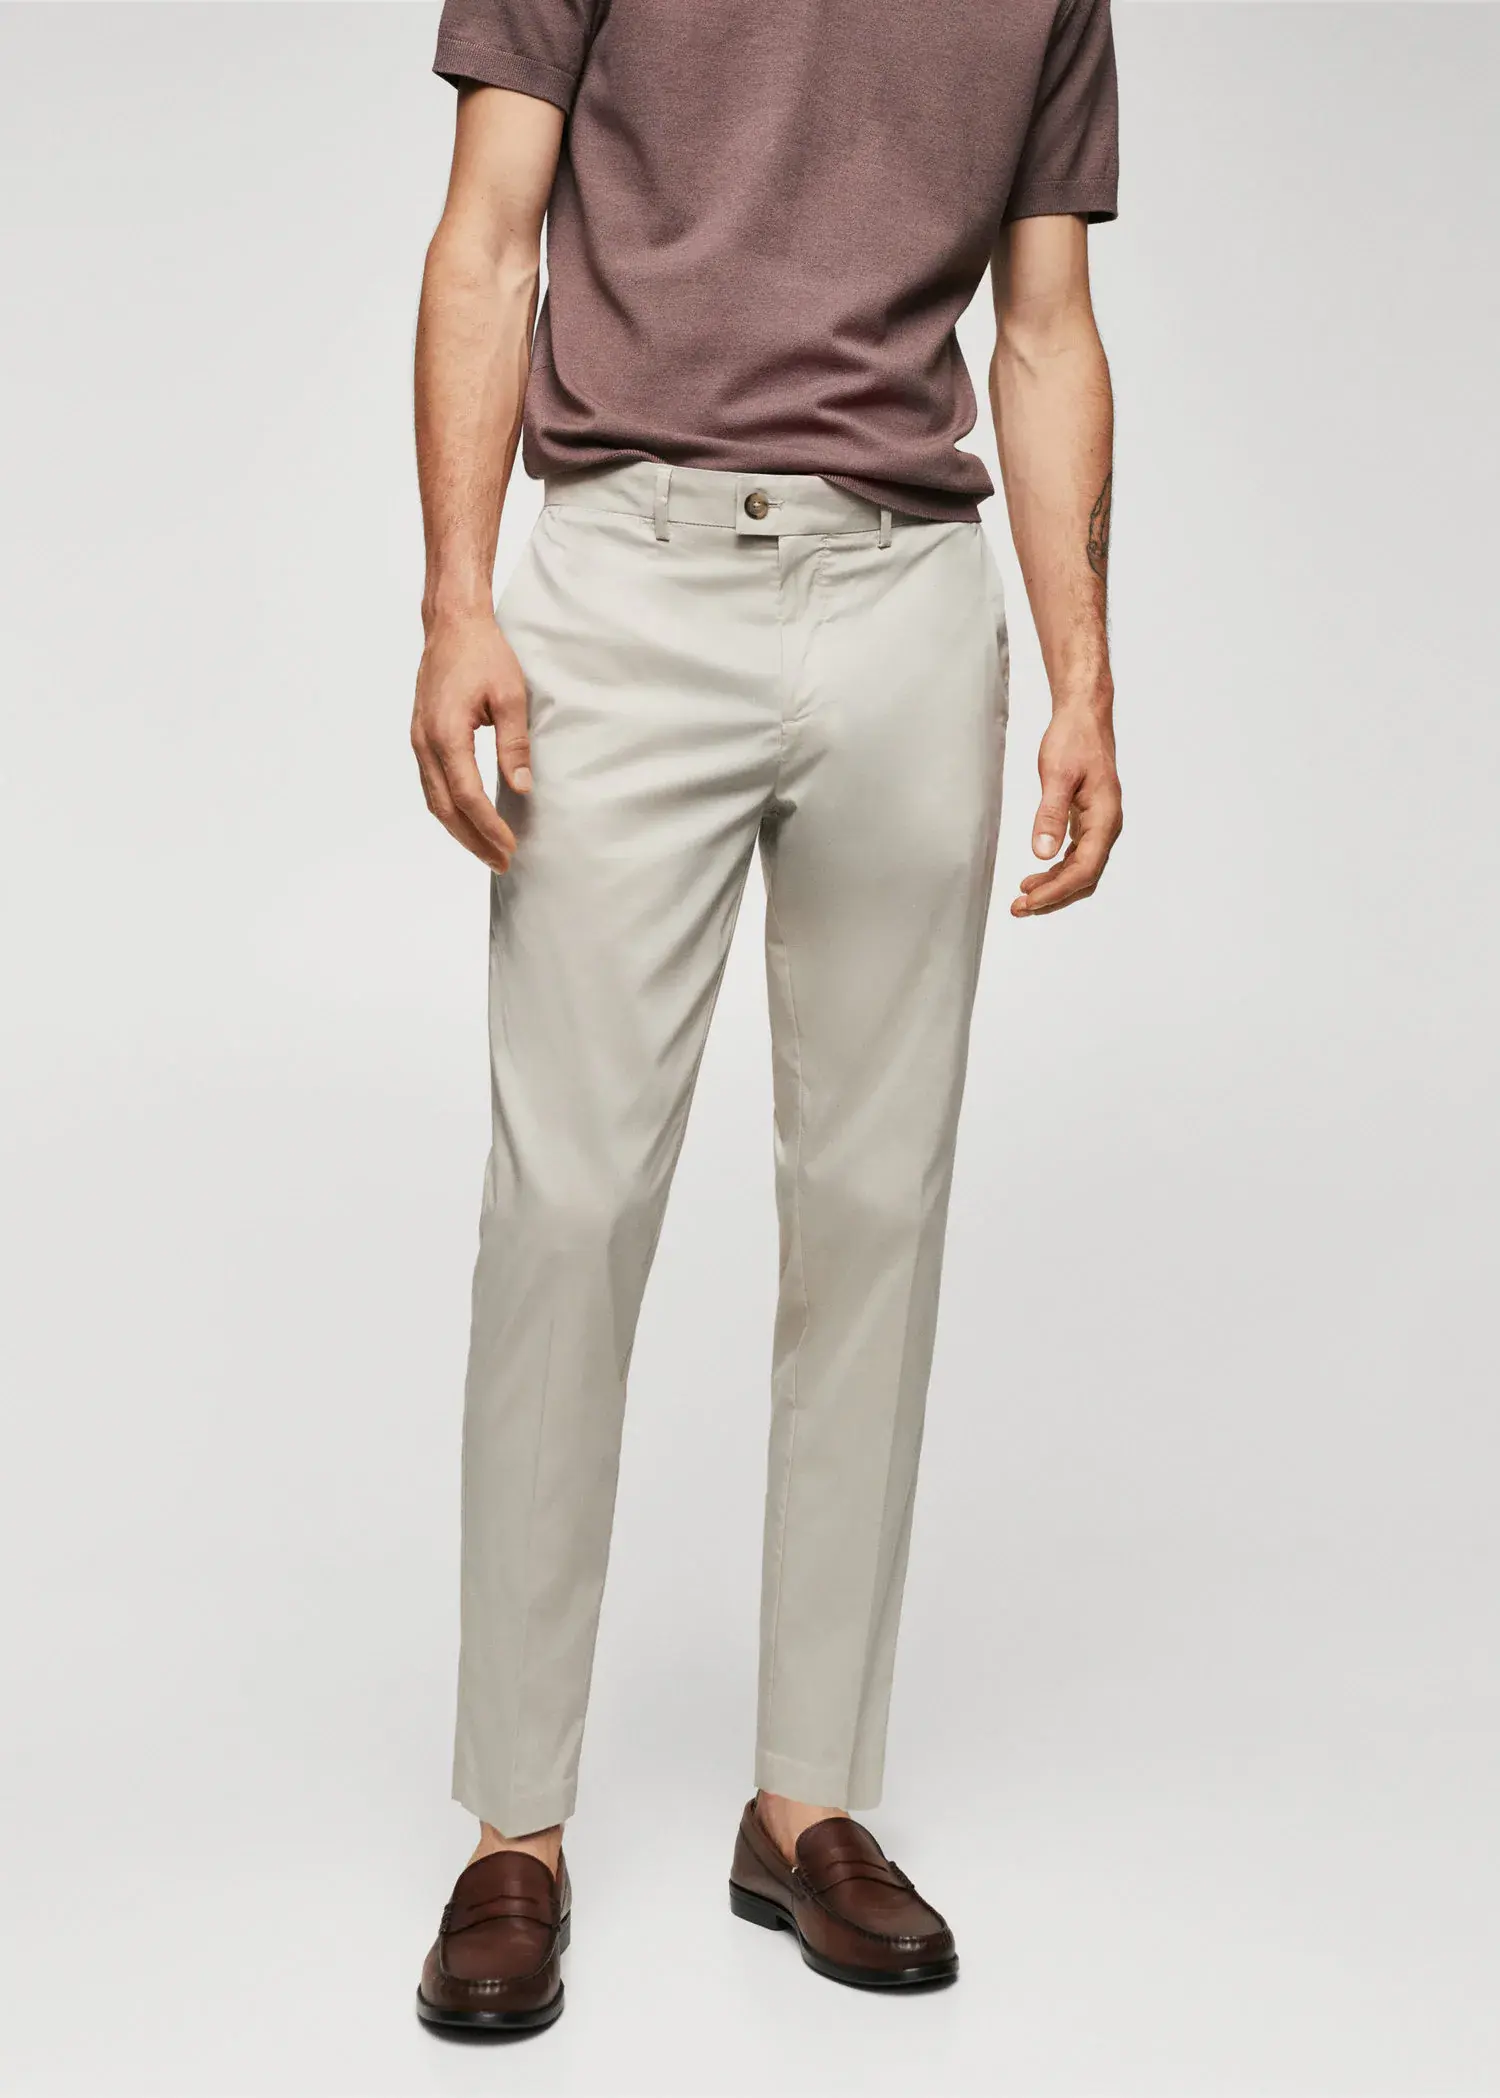 Mango Lightweight cotton trousers. a man wearing a tan shirt and a pair of white pants. 